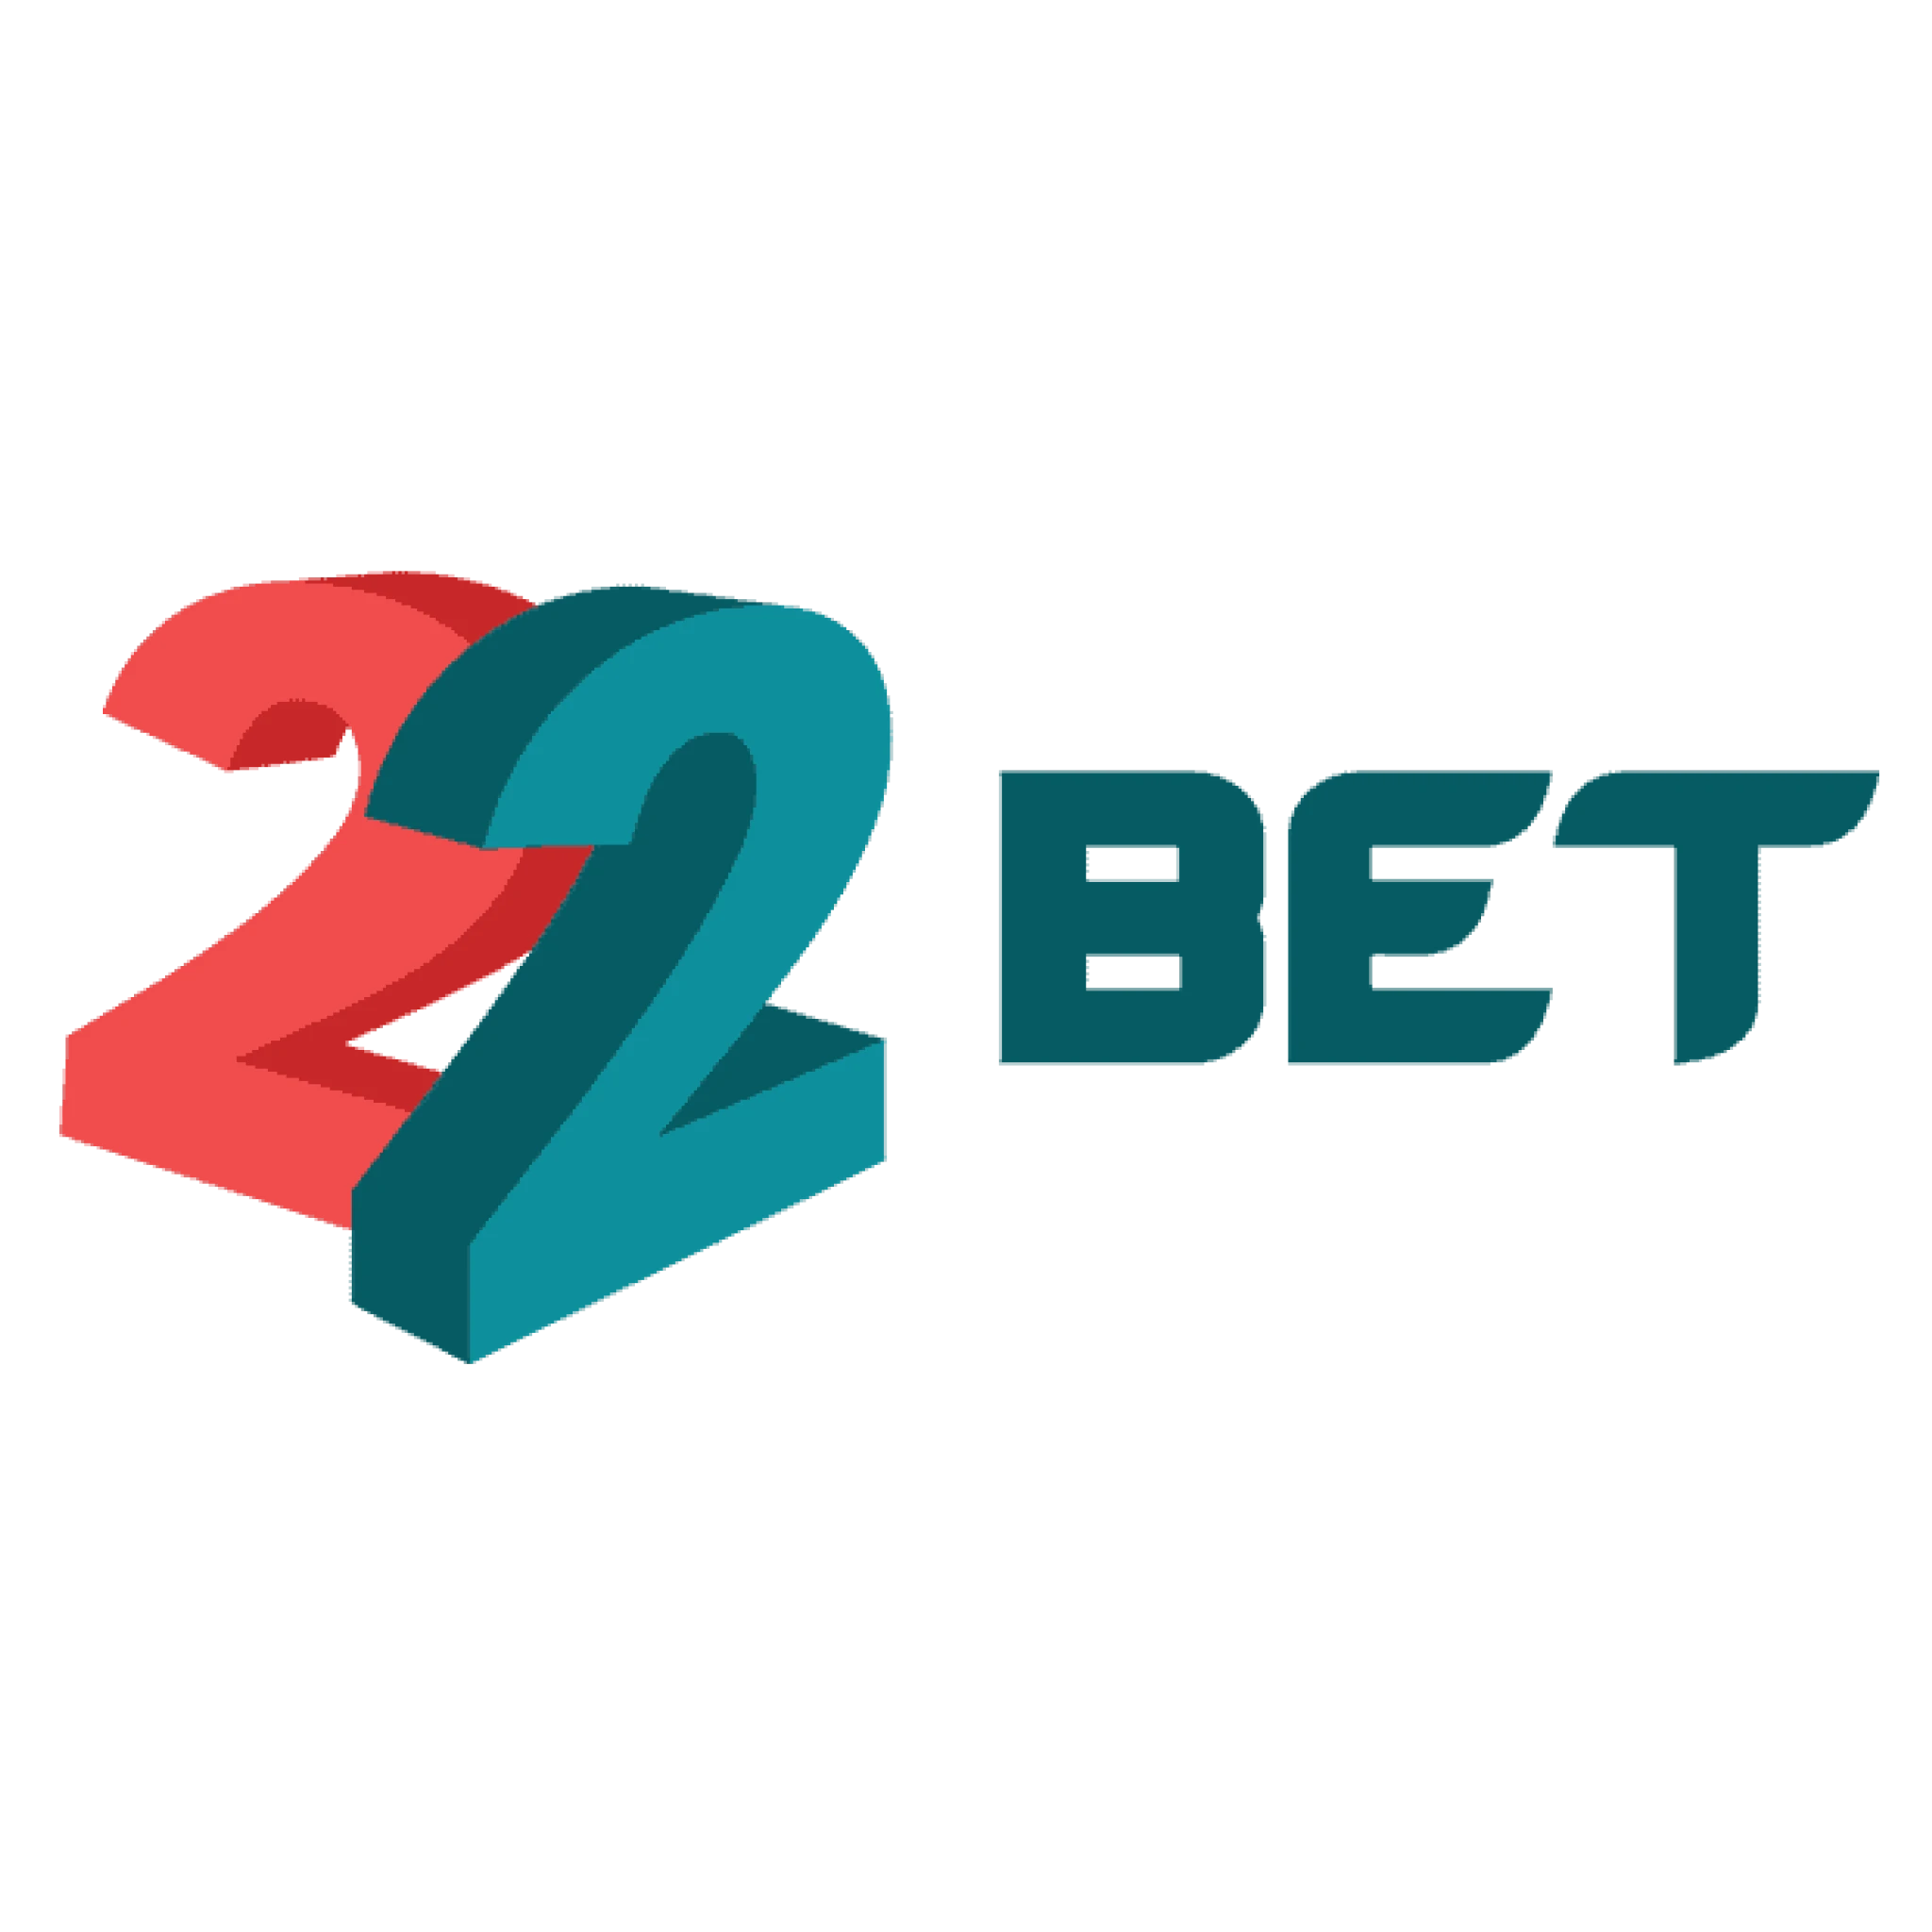 Online cricket betting is more accessible with 22bet.